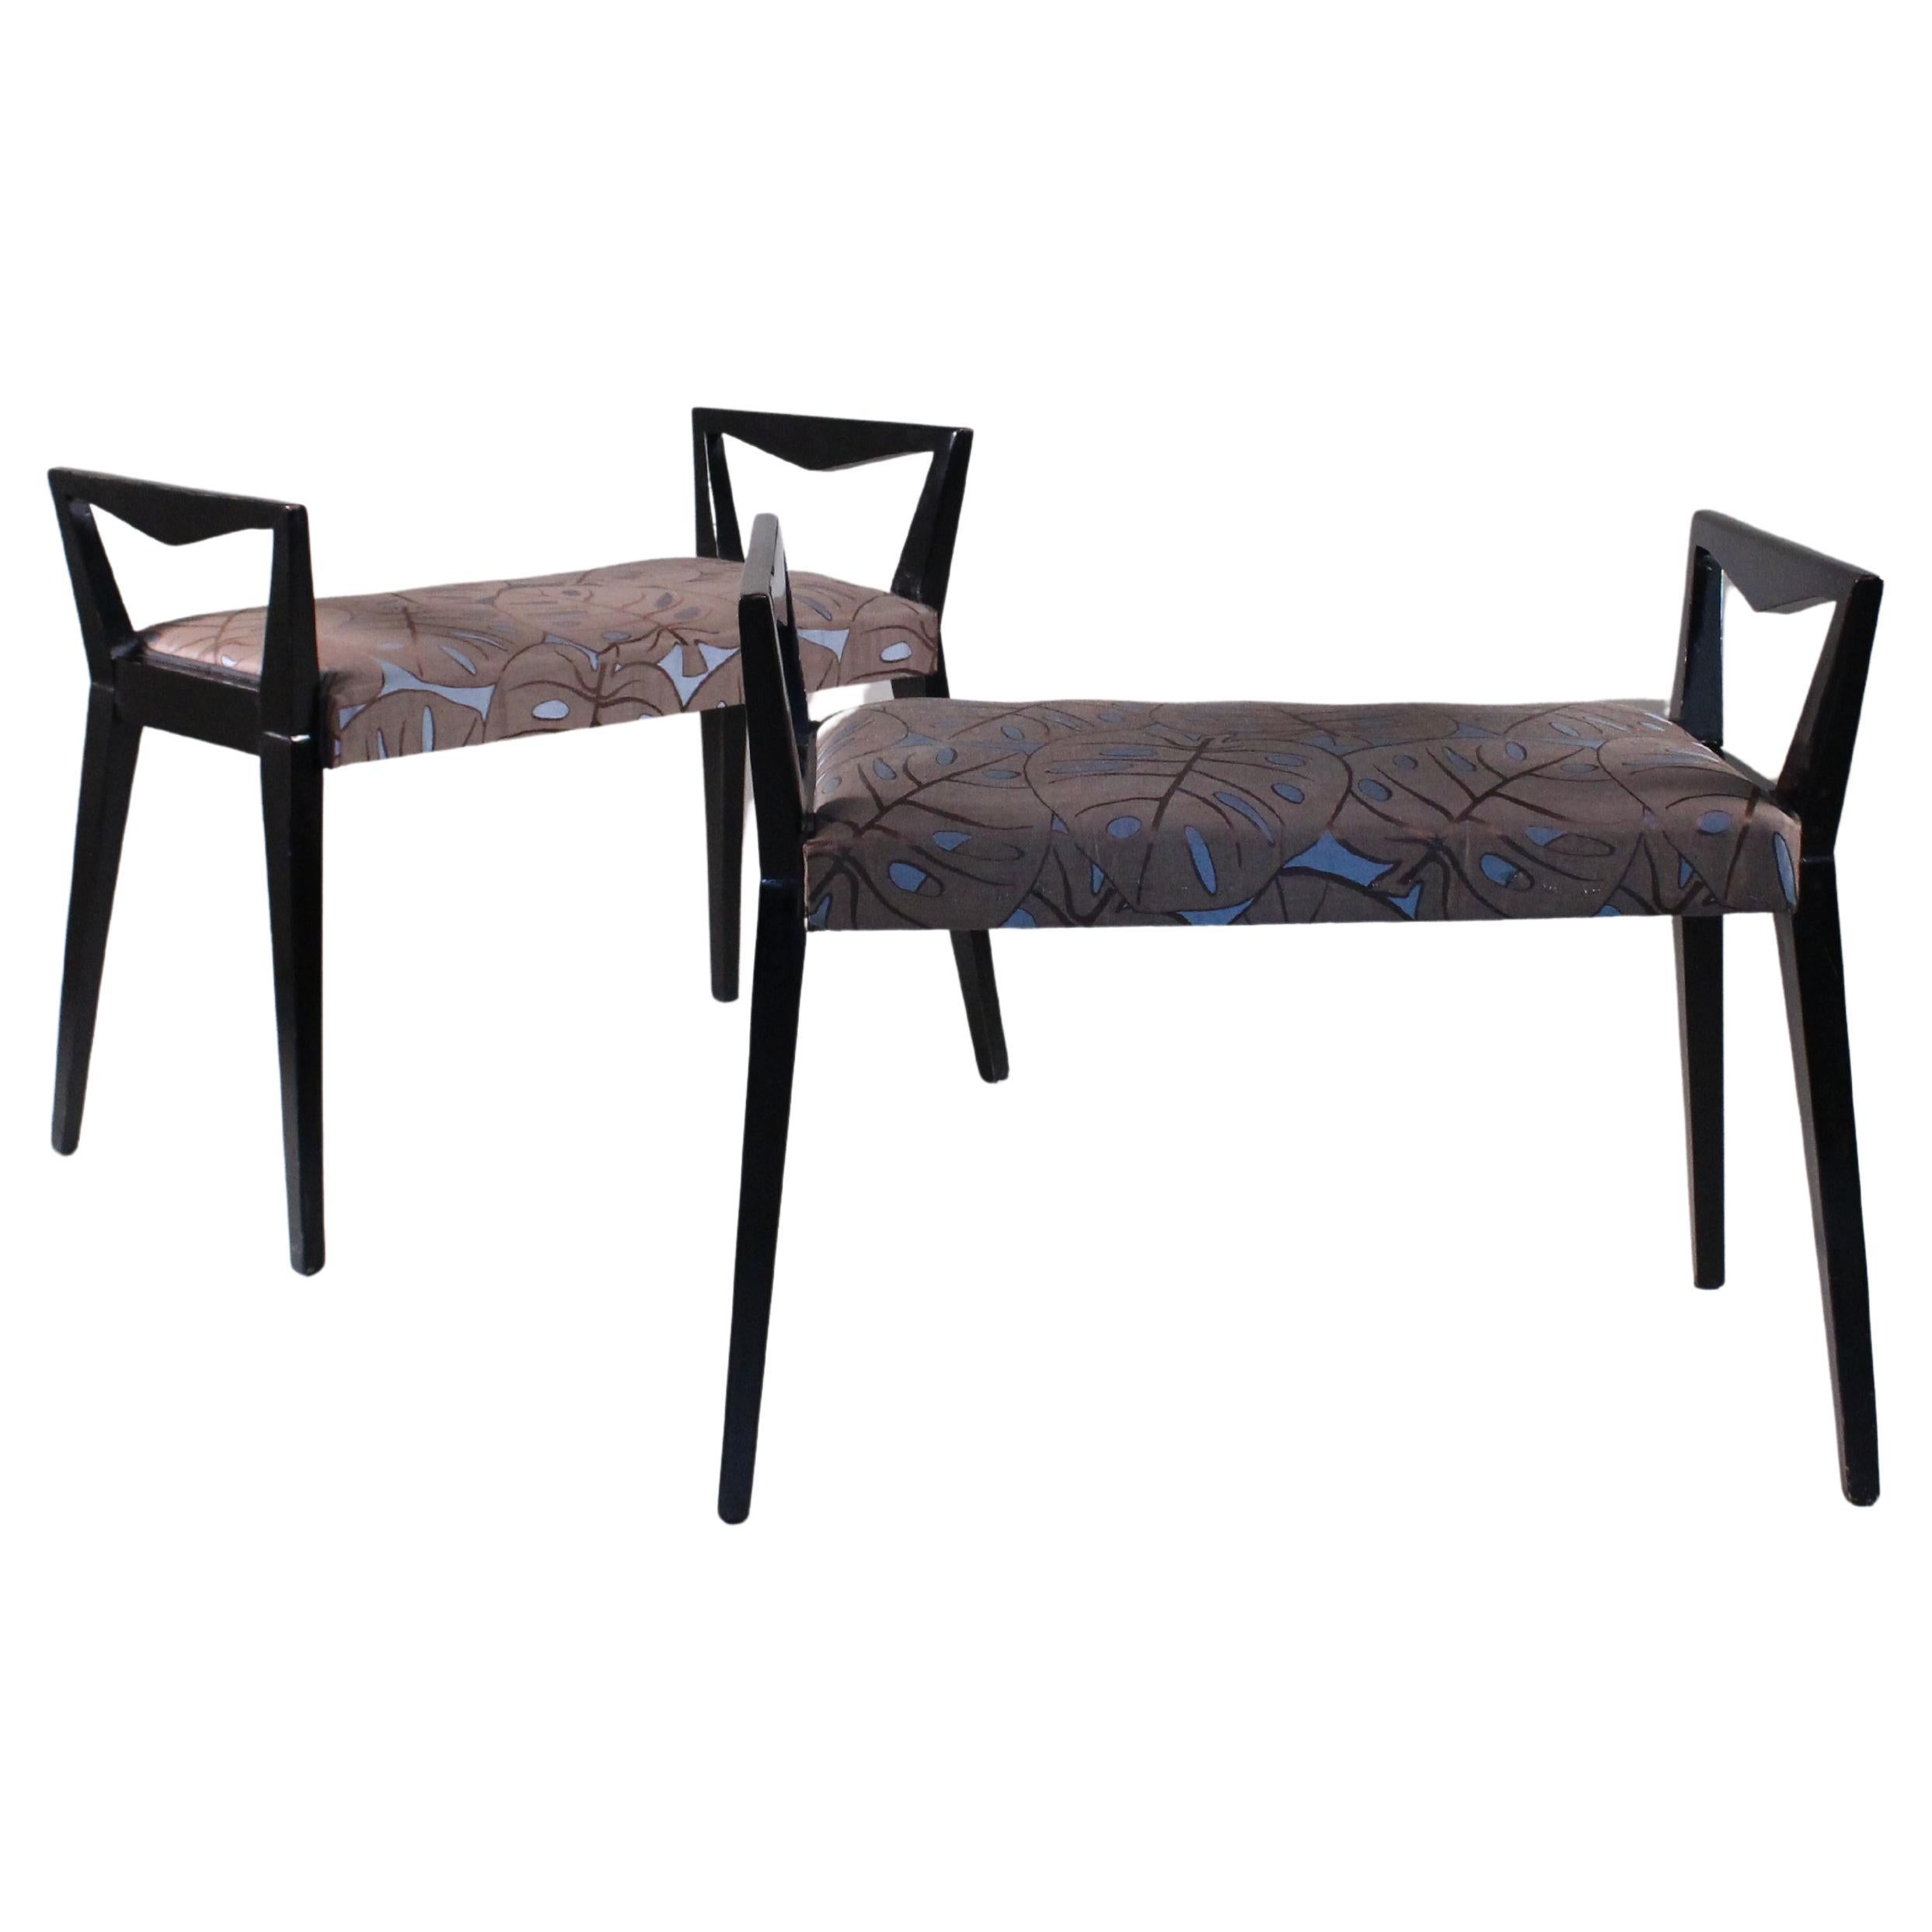 Set of 2 black benches by Guglielmo Ulrich For Sale